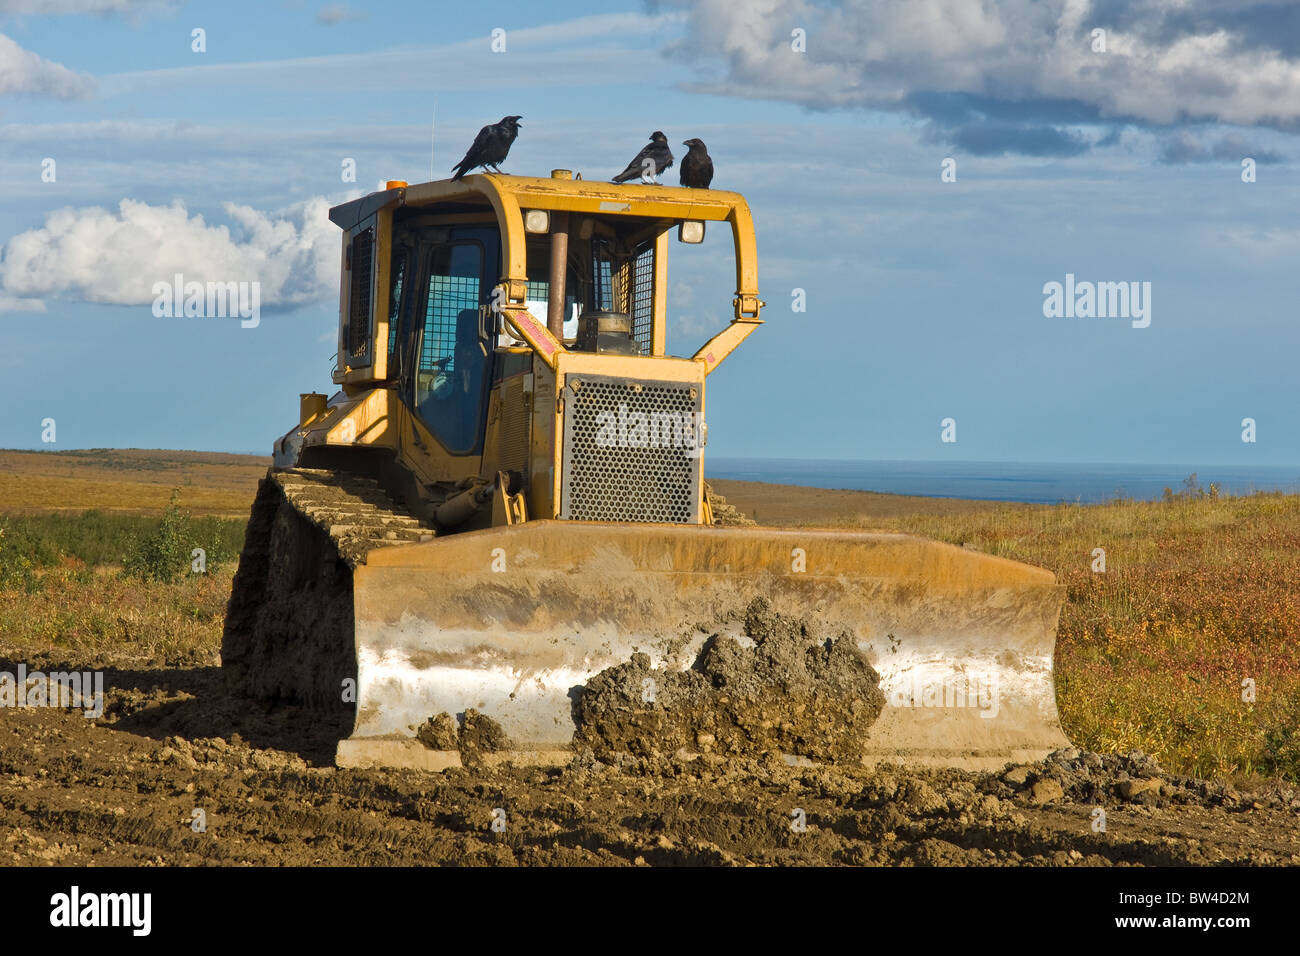 A group of ravens chatter on top of a piece of road building equipment Stock Photo